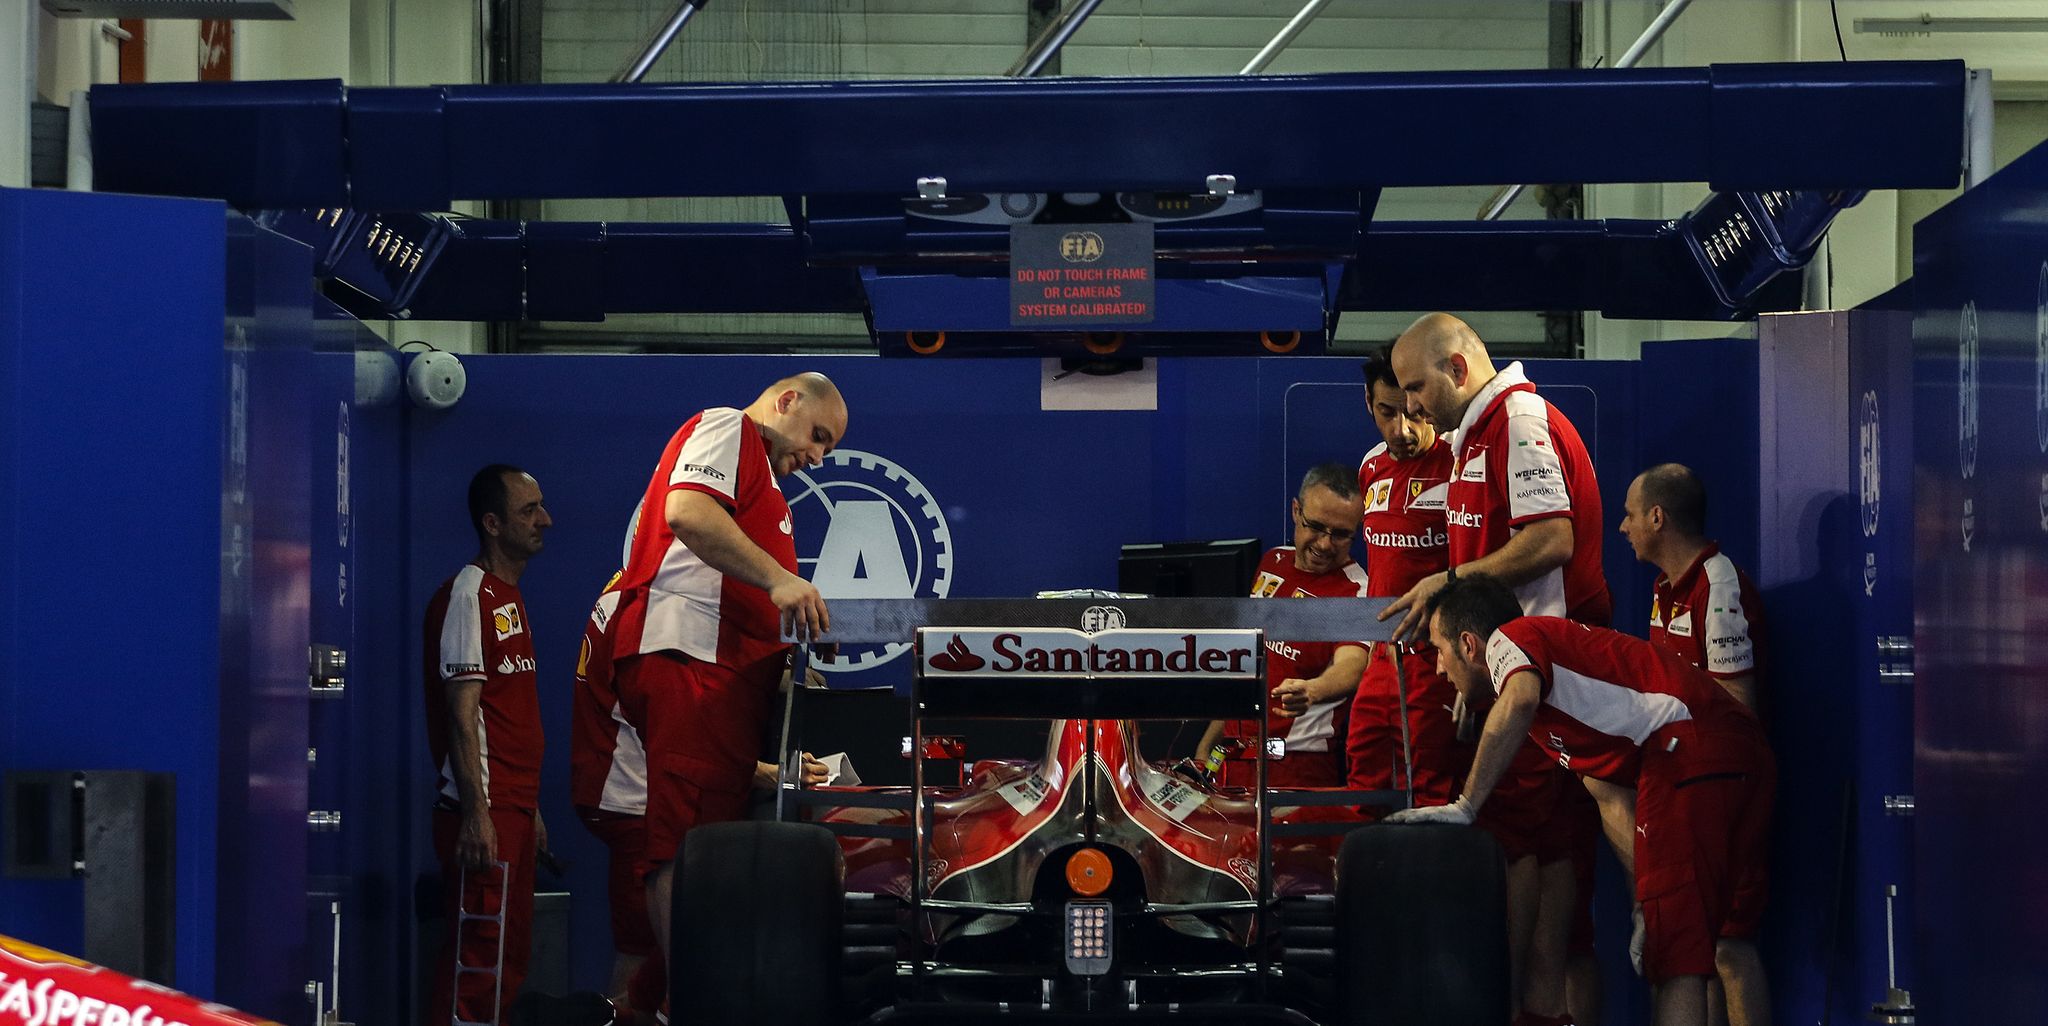 scuderia ferrari f1 team car is under official inspection by fia ahead of malaysian formula one grand prix at sepang interational circuit sic in malaysia on 26 march 2015 malaysian formula one grand prix will take place on 29 march 2015 photo by ahmad yusninurphoto photo by nurphotonurphoto via getty images